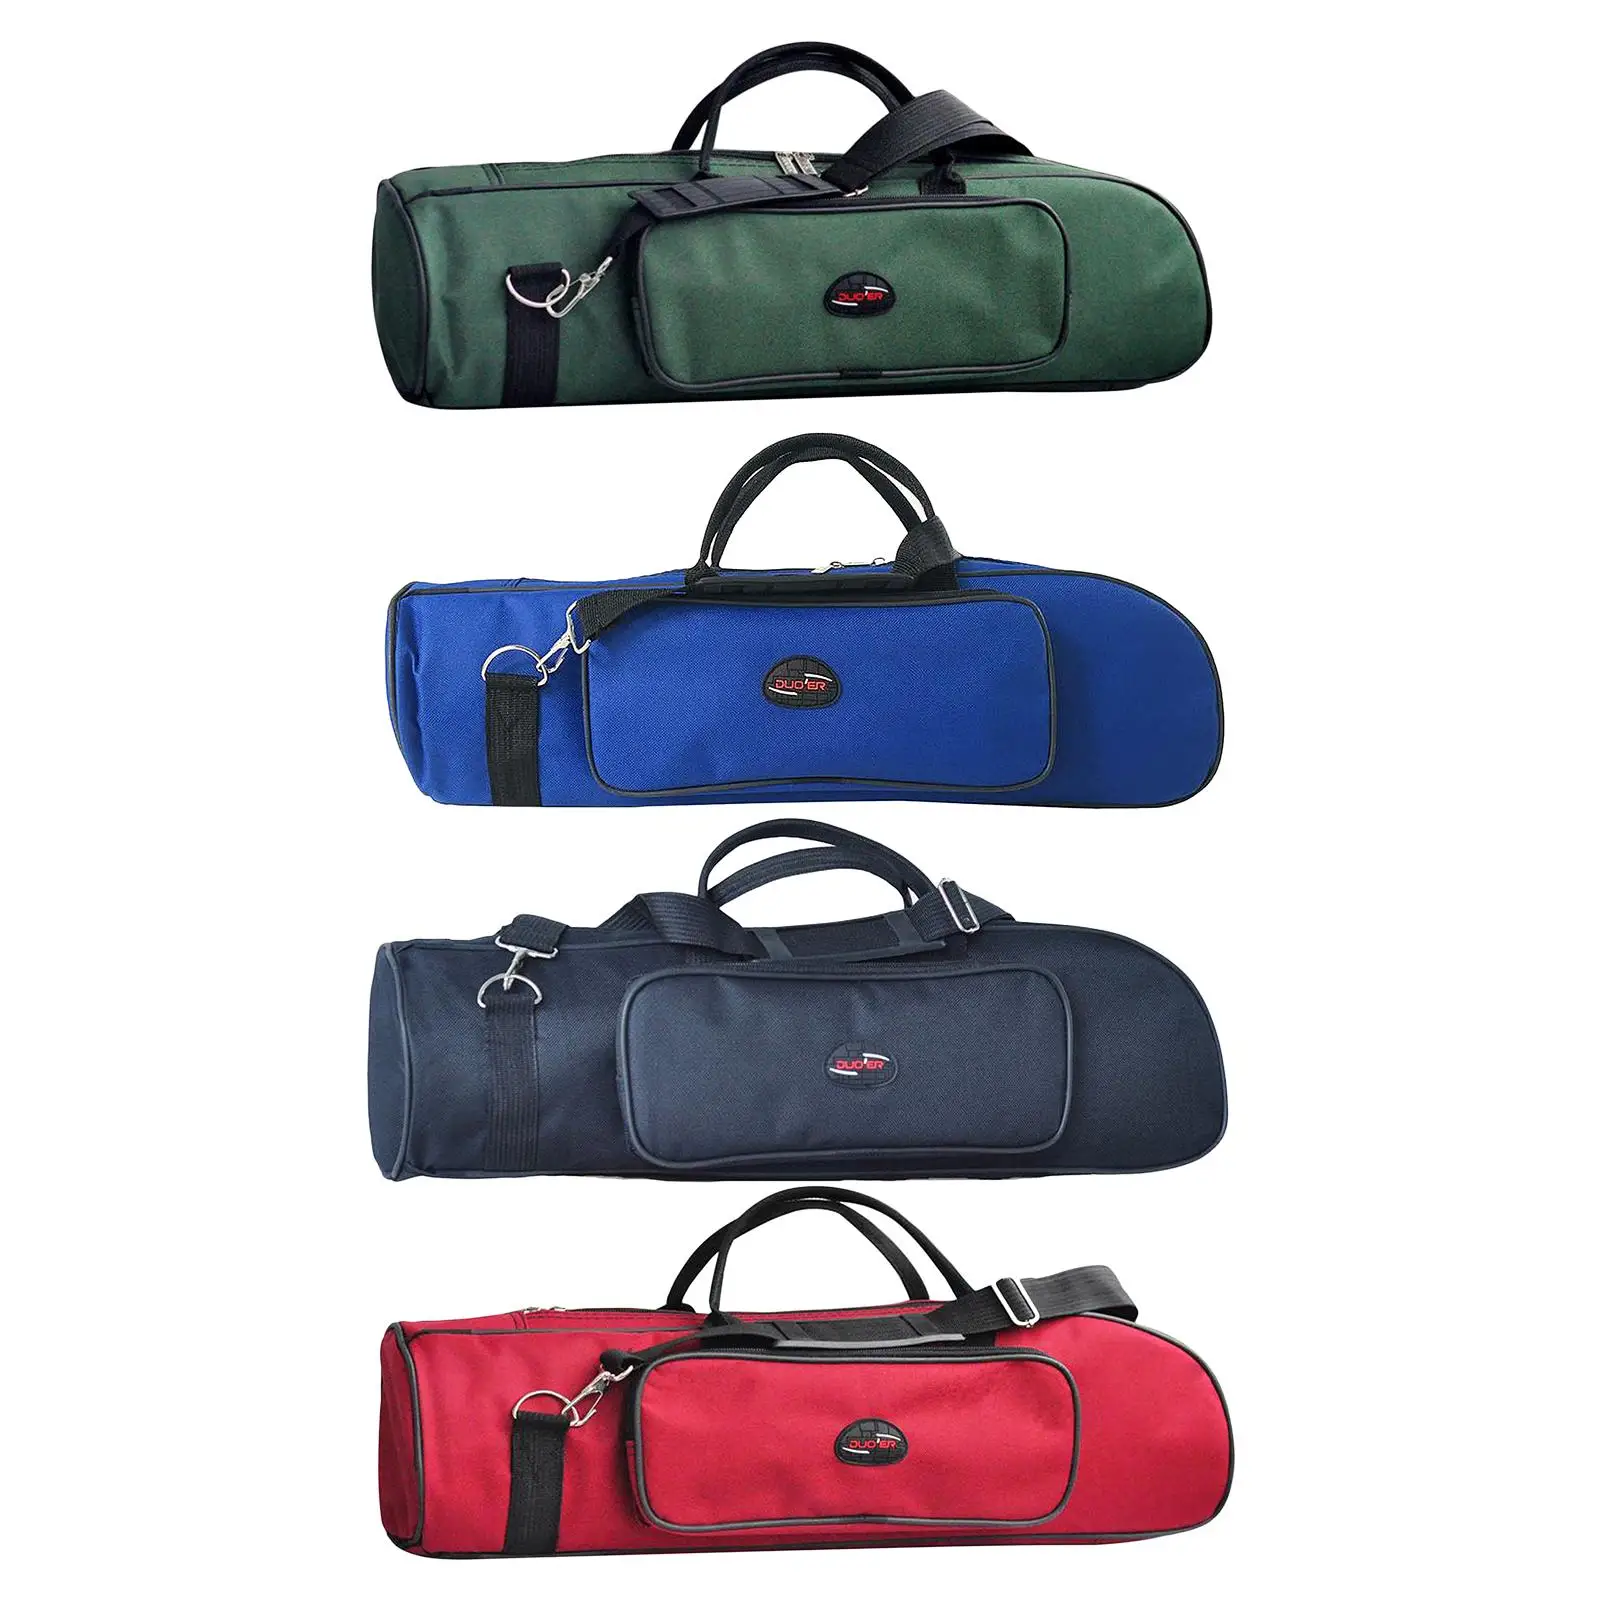 Travel Lightweight Trumpet Carry Case Oxford Water-resistant Shoulder Bags